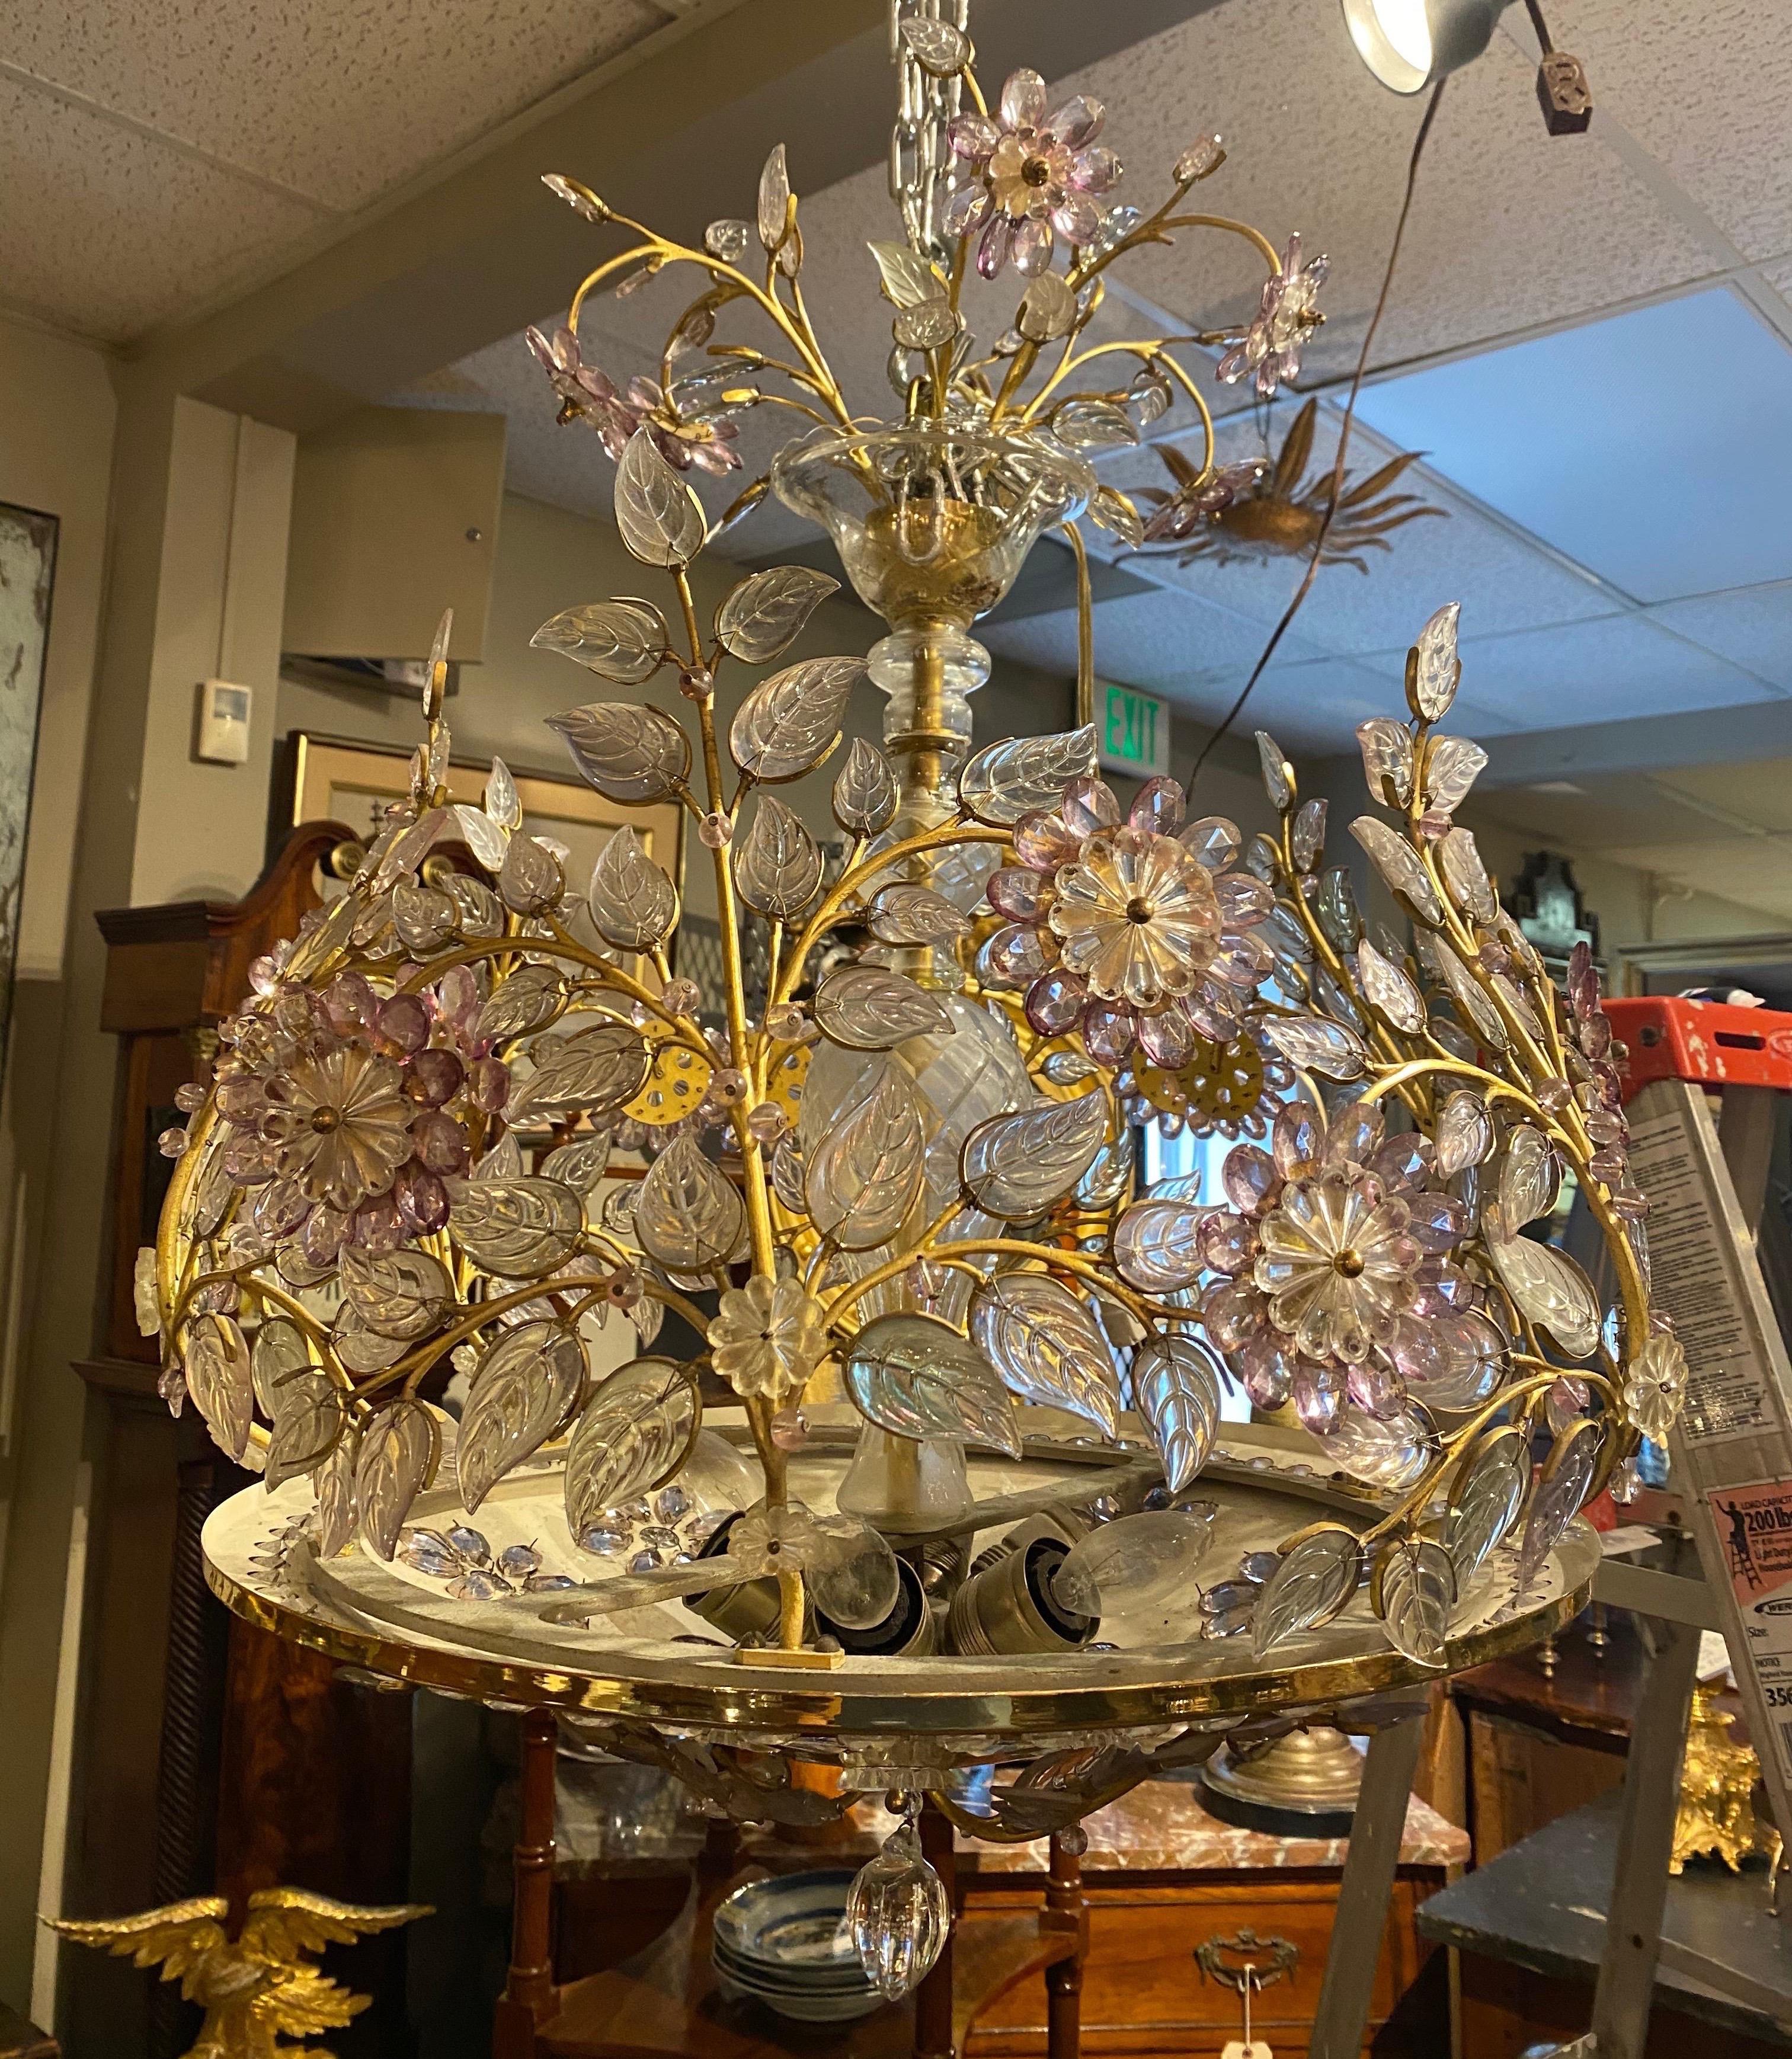 Incredible 6-Light Midcentury French Chandelier by Maison Baguès, Paris In Good Condition For Sale In Charleston, SC